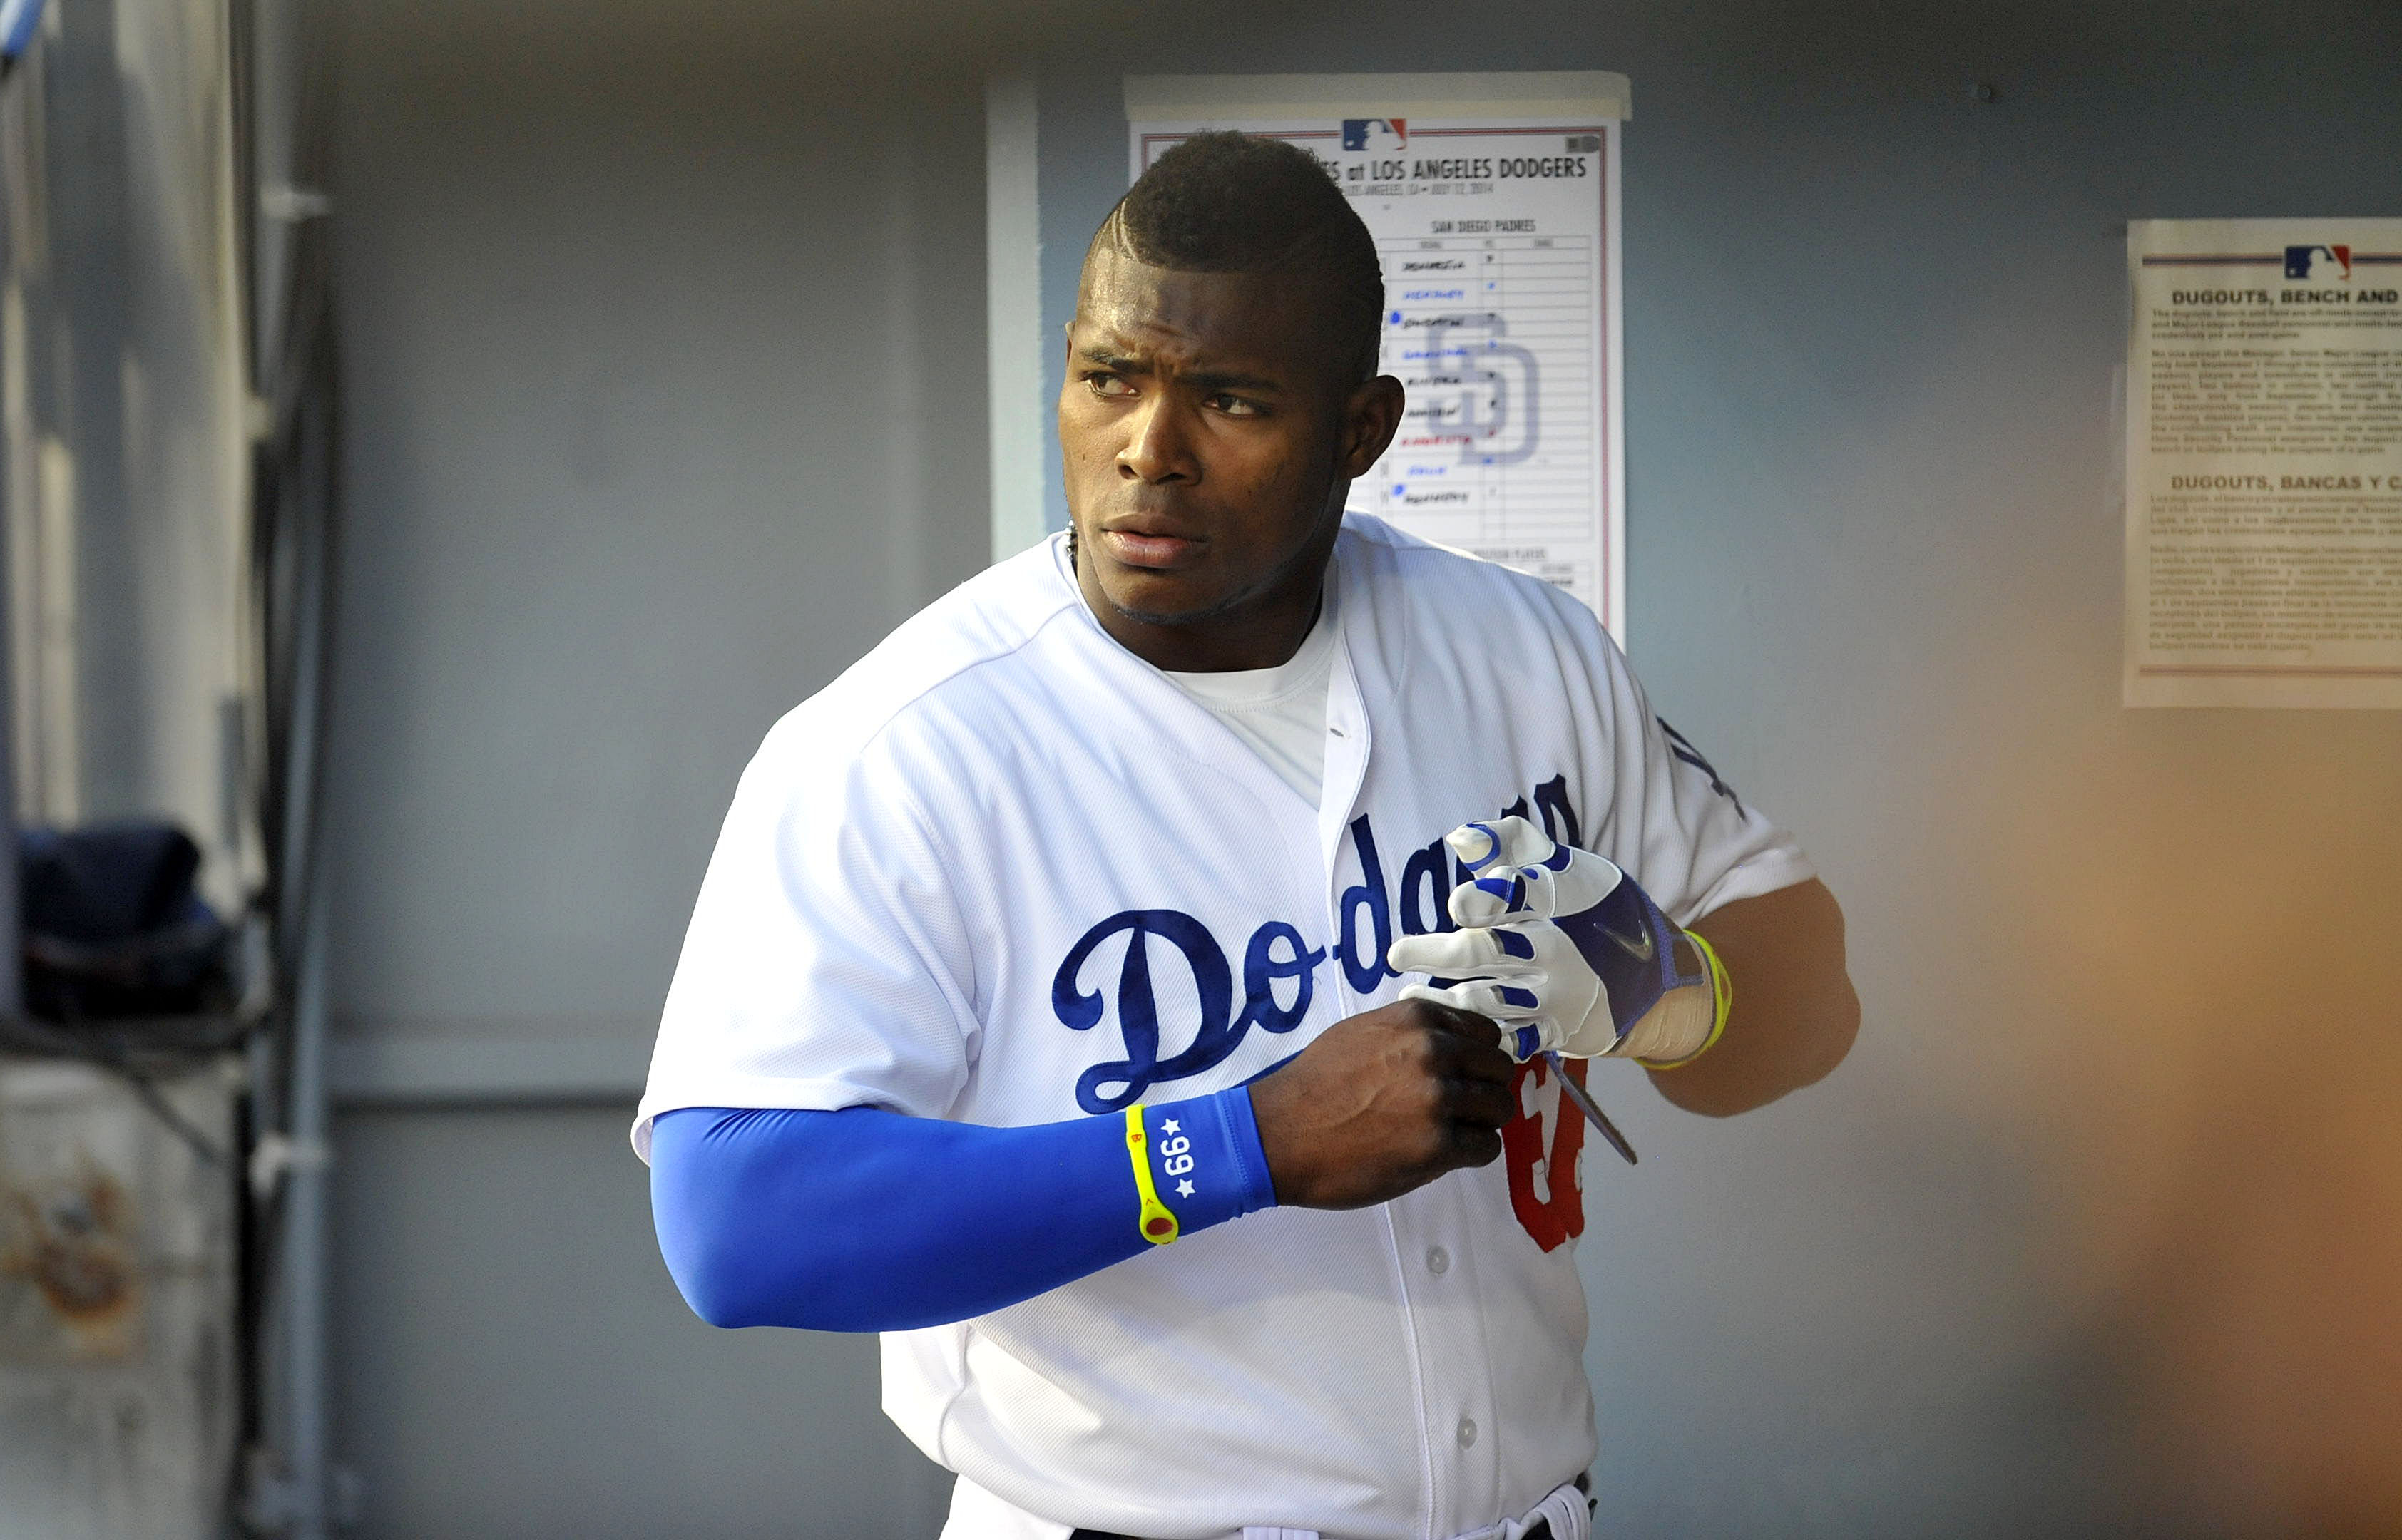 All-Star Game: Yasiel Puig not chosen among replacements – The Denver Post